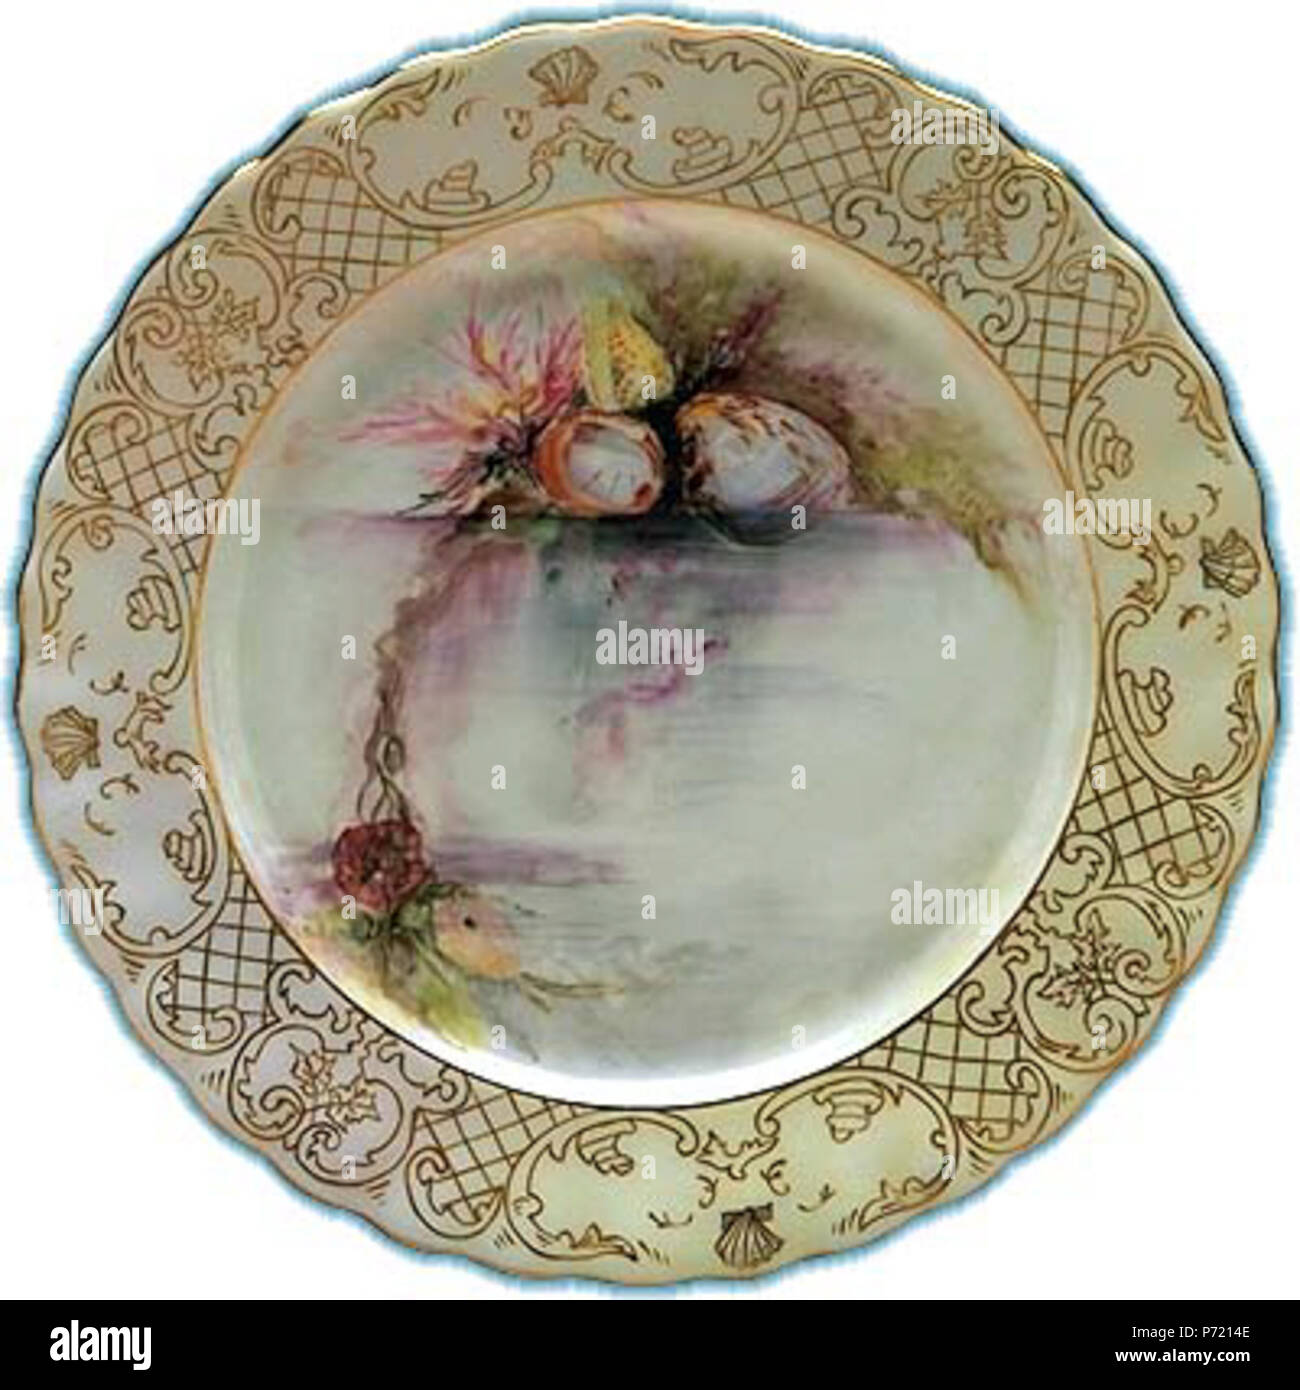 English: Cytherea gibbia, Halymenia ligulata. A hand-painted plate from the Cabot Commemorative State Dinner Service. 1897 10 Cytherea gibbia, Halymenia ligulata 1897 - Painted by L.O. Adams 1865-1945 Stock Photo